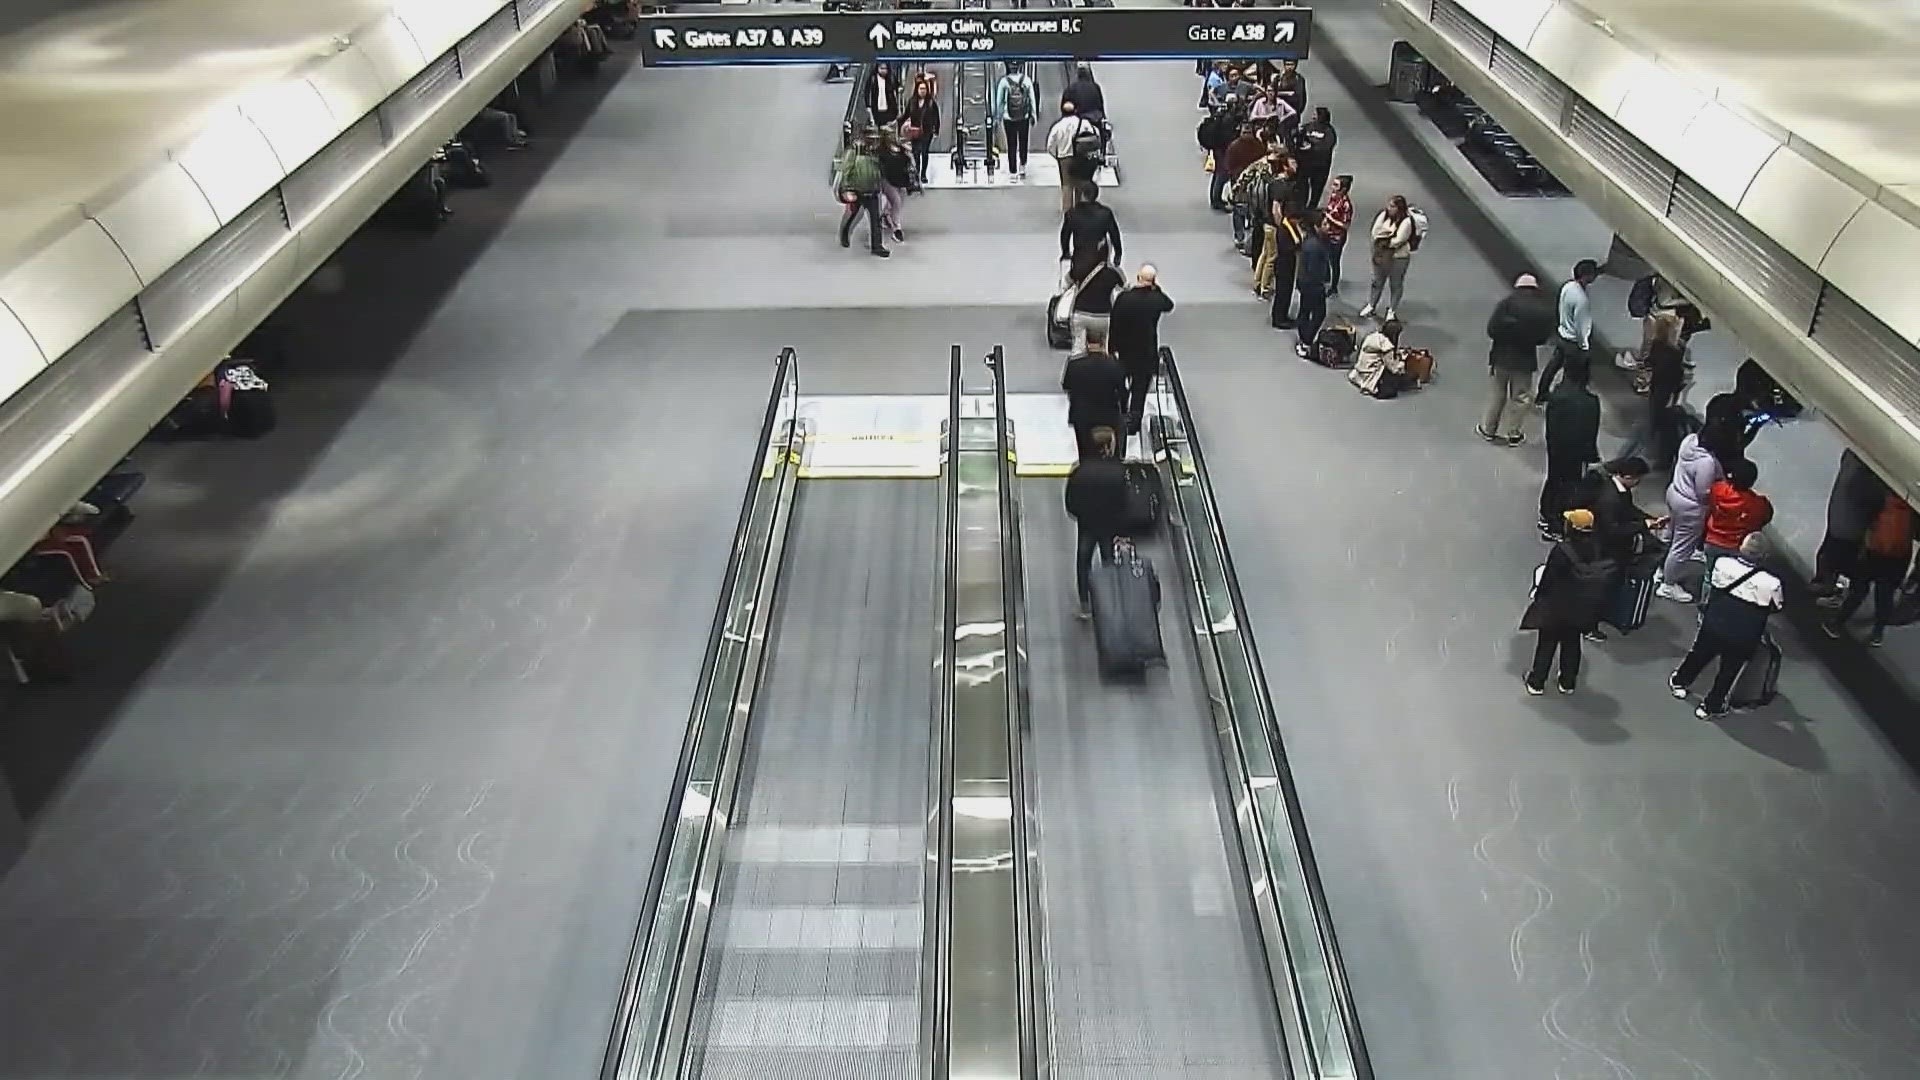 Video obtained by 9NEWS shows a missing part on a moving walkway moments before it “swallowed” a pilot’s foot, causing him to fall.